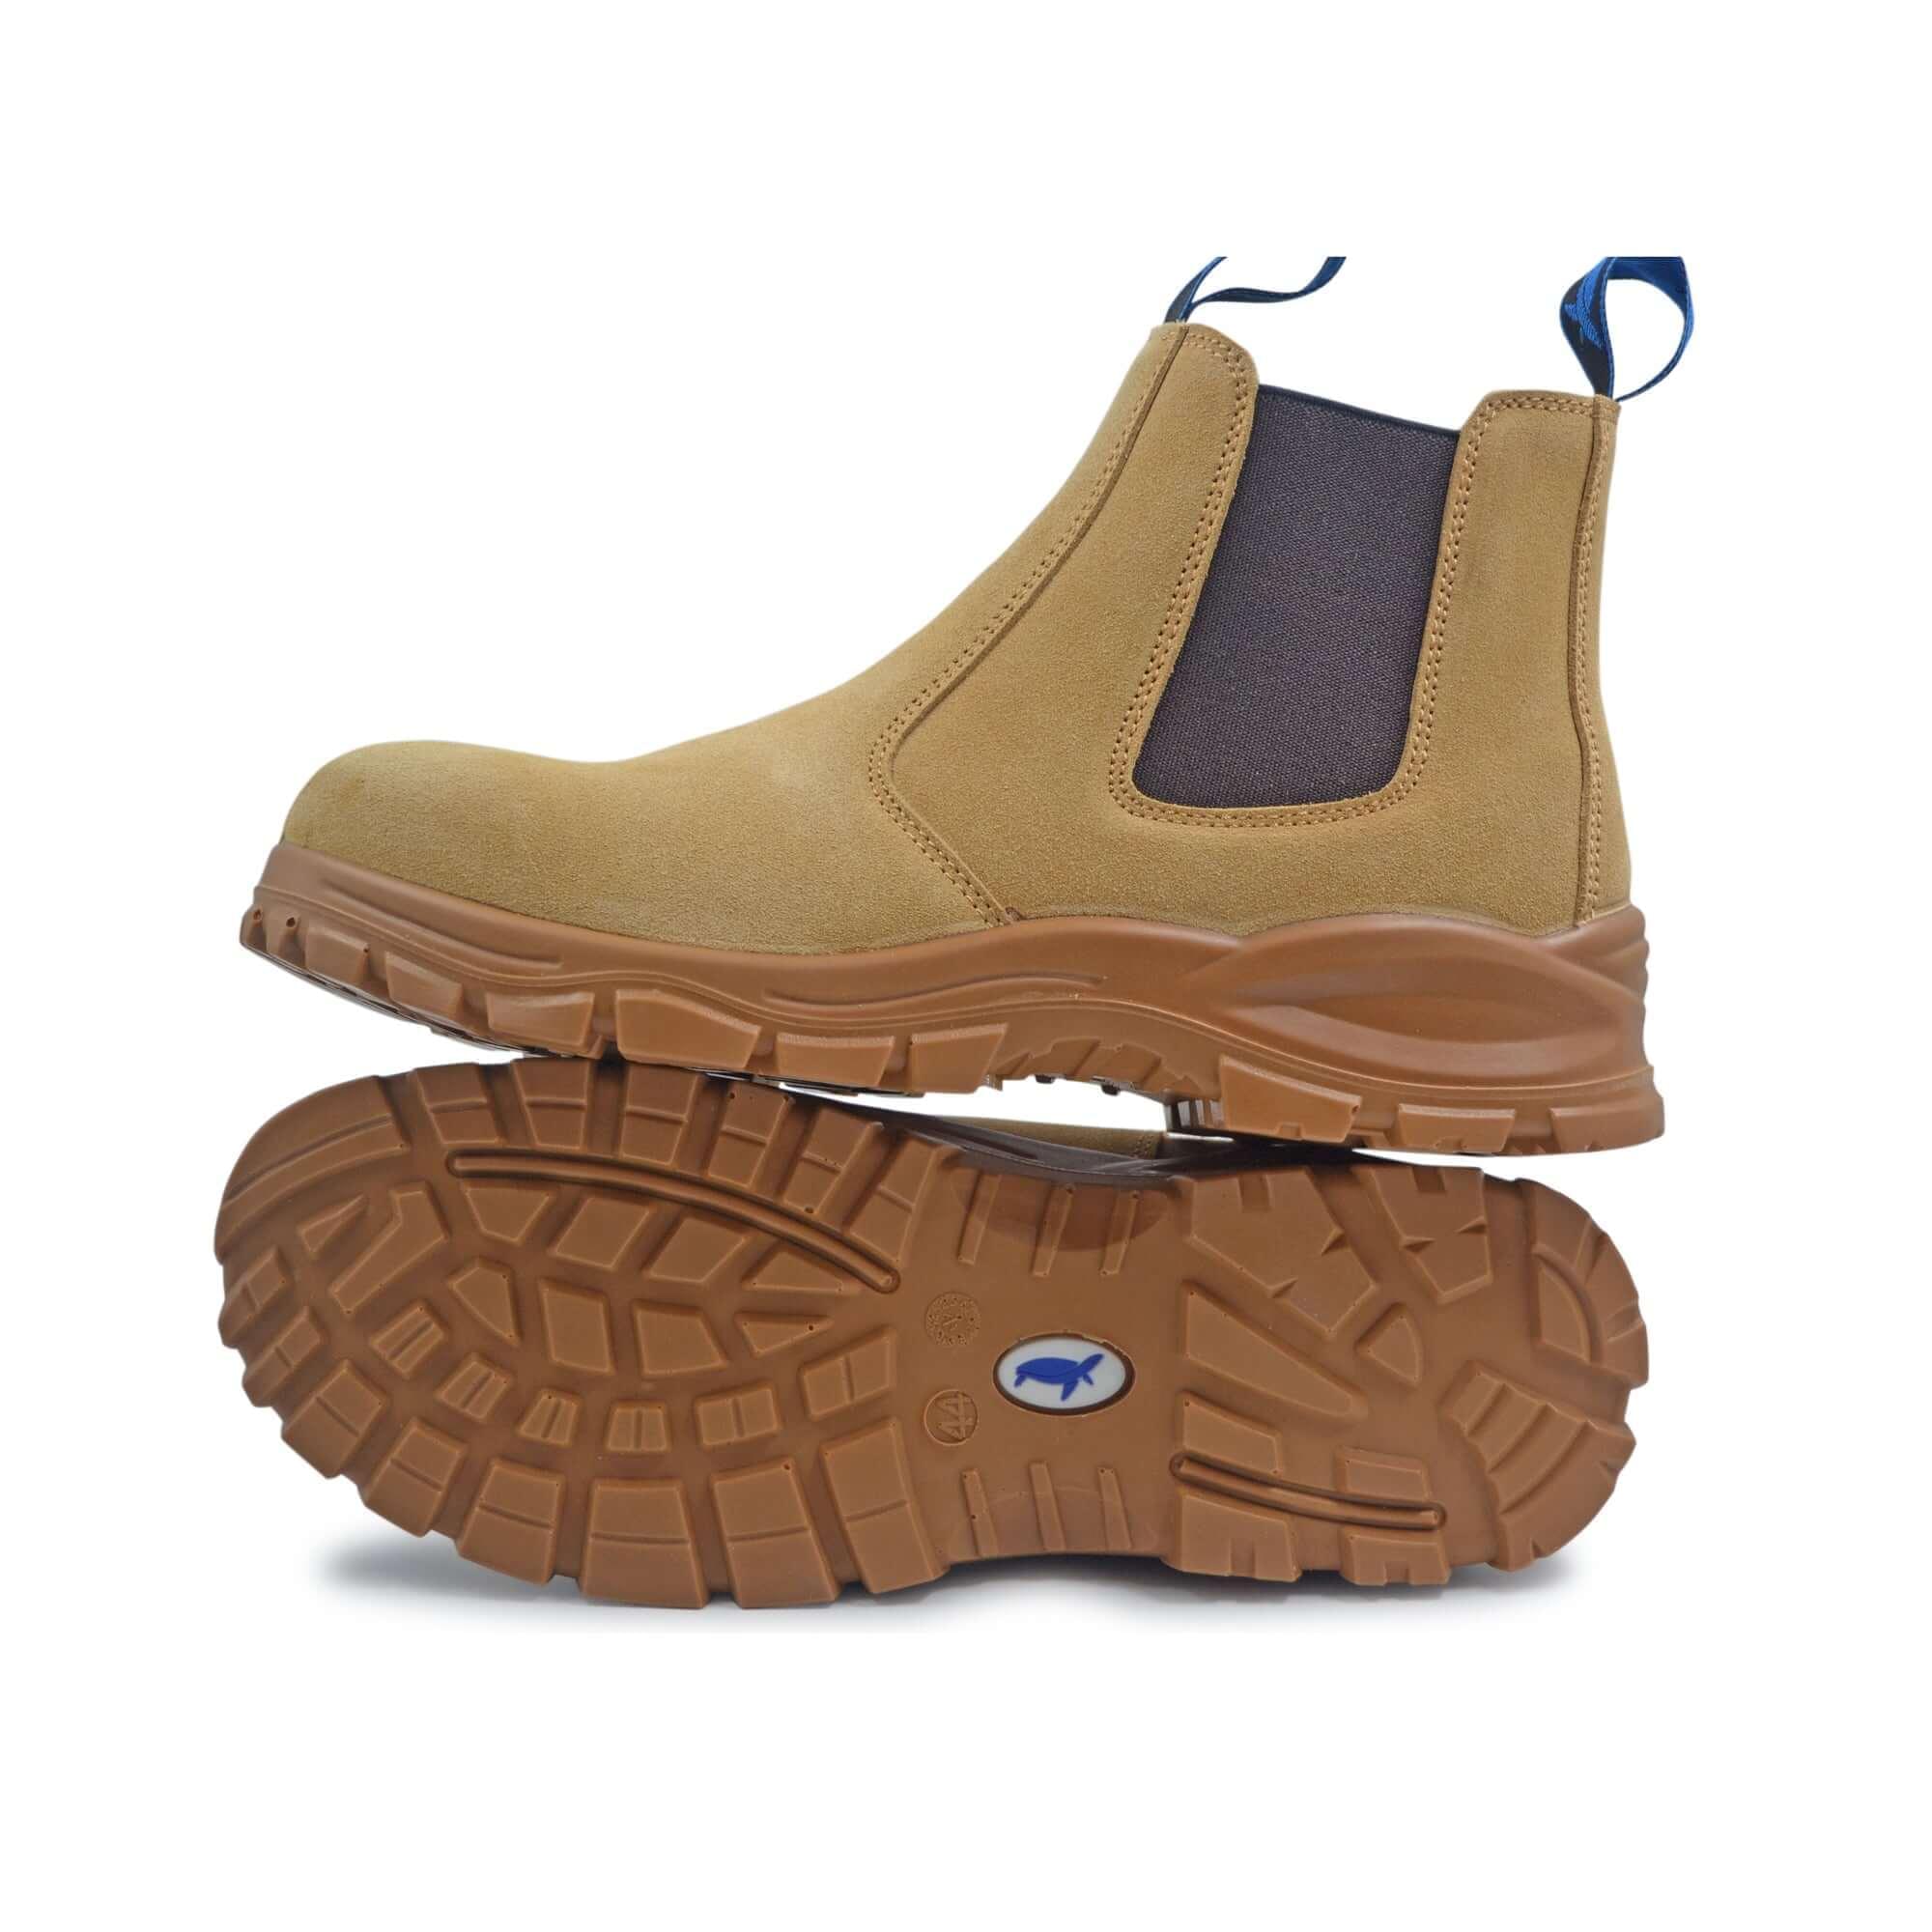 safety boots | Slip On Safety Boots NZ